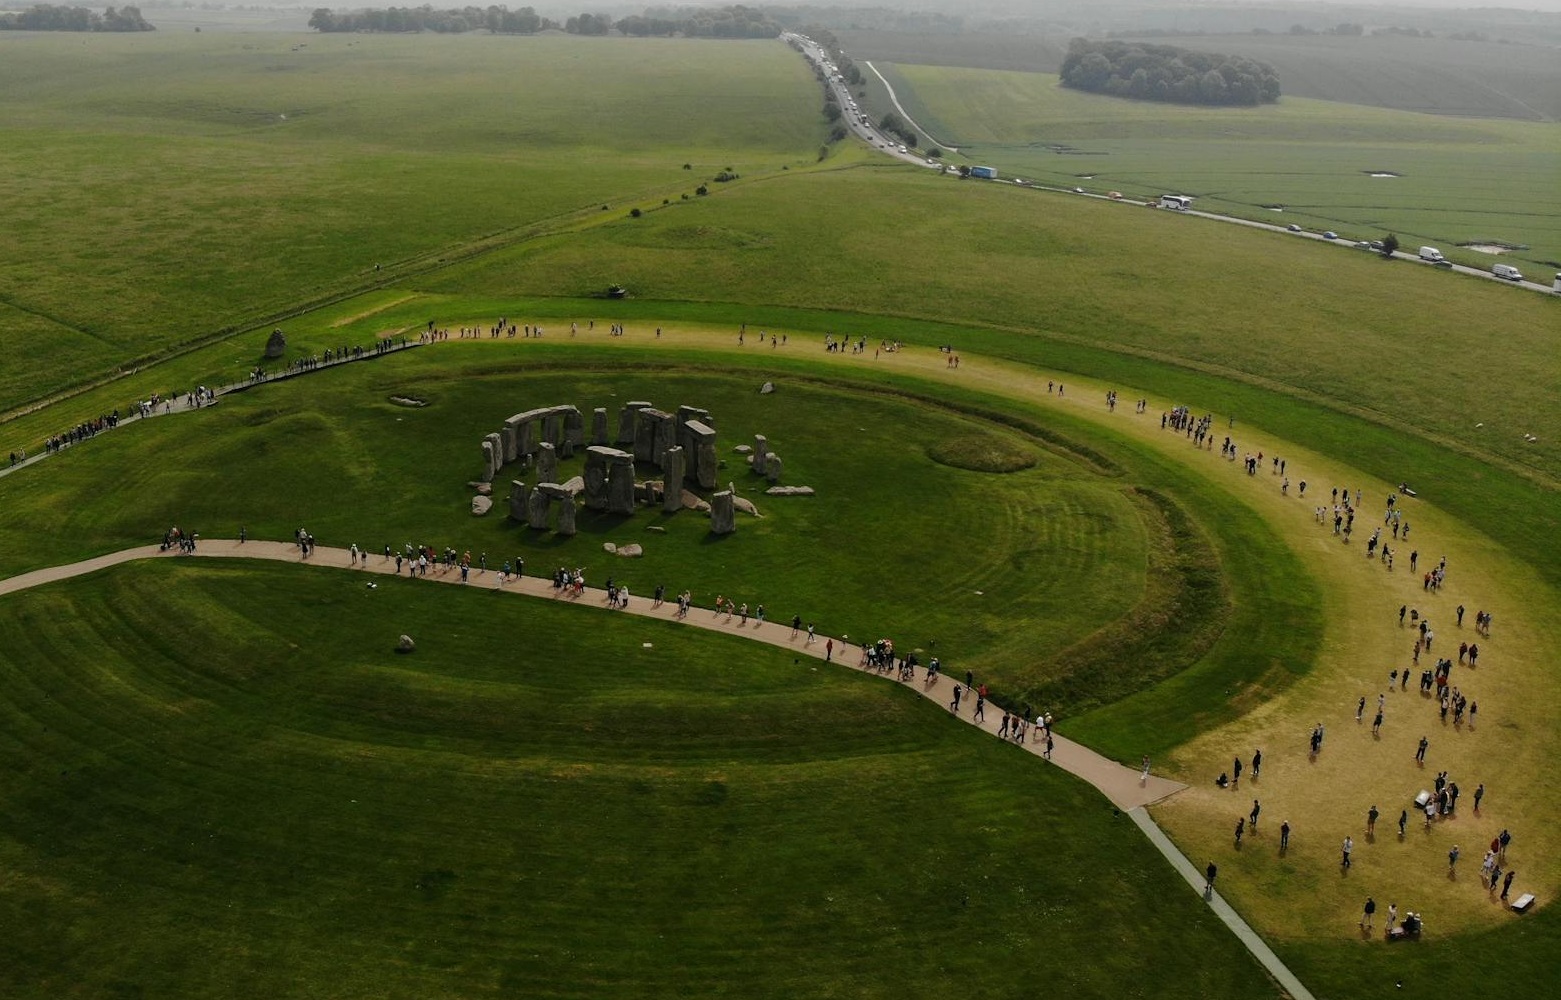 <p>On top of the fact that Stone Henge is literally just <em>stones, </em>many have reported that the visitor experience itself was frustrating. Not only does it cost a pretty penny, but many tourists were utterly shocked by <strong>how small the site actually is.</strong></p>